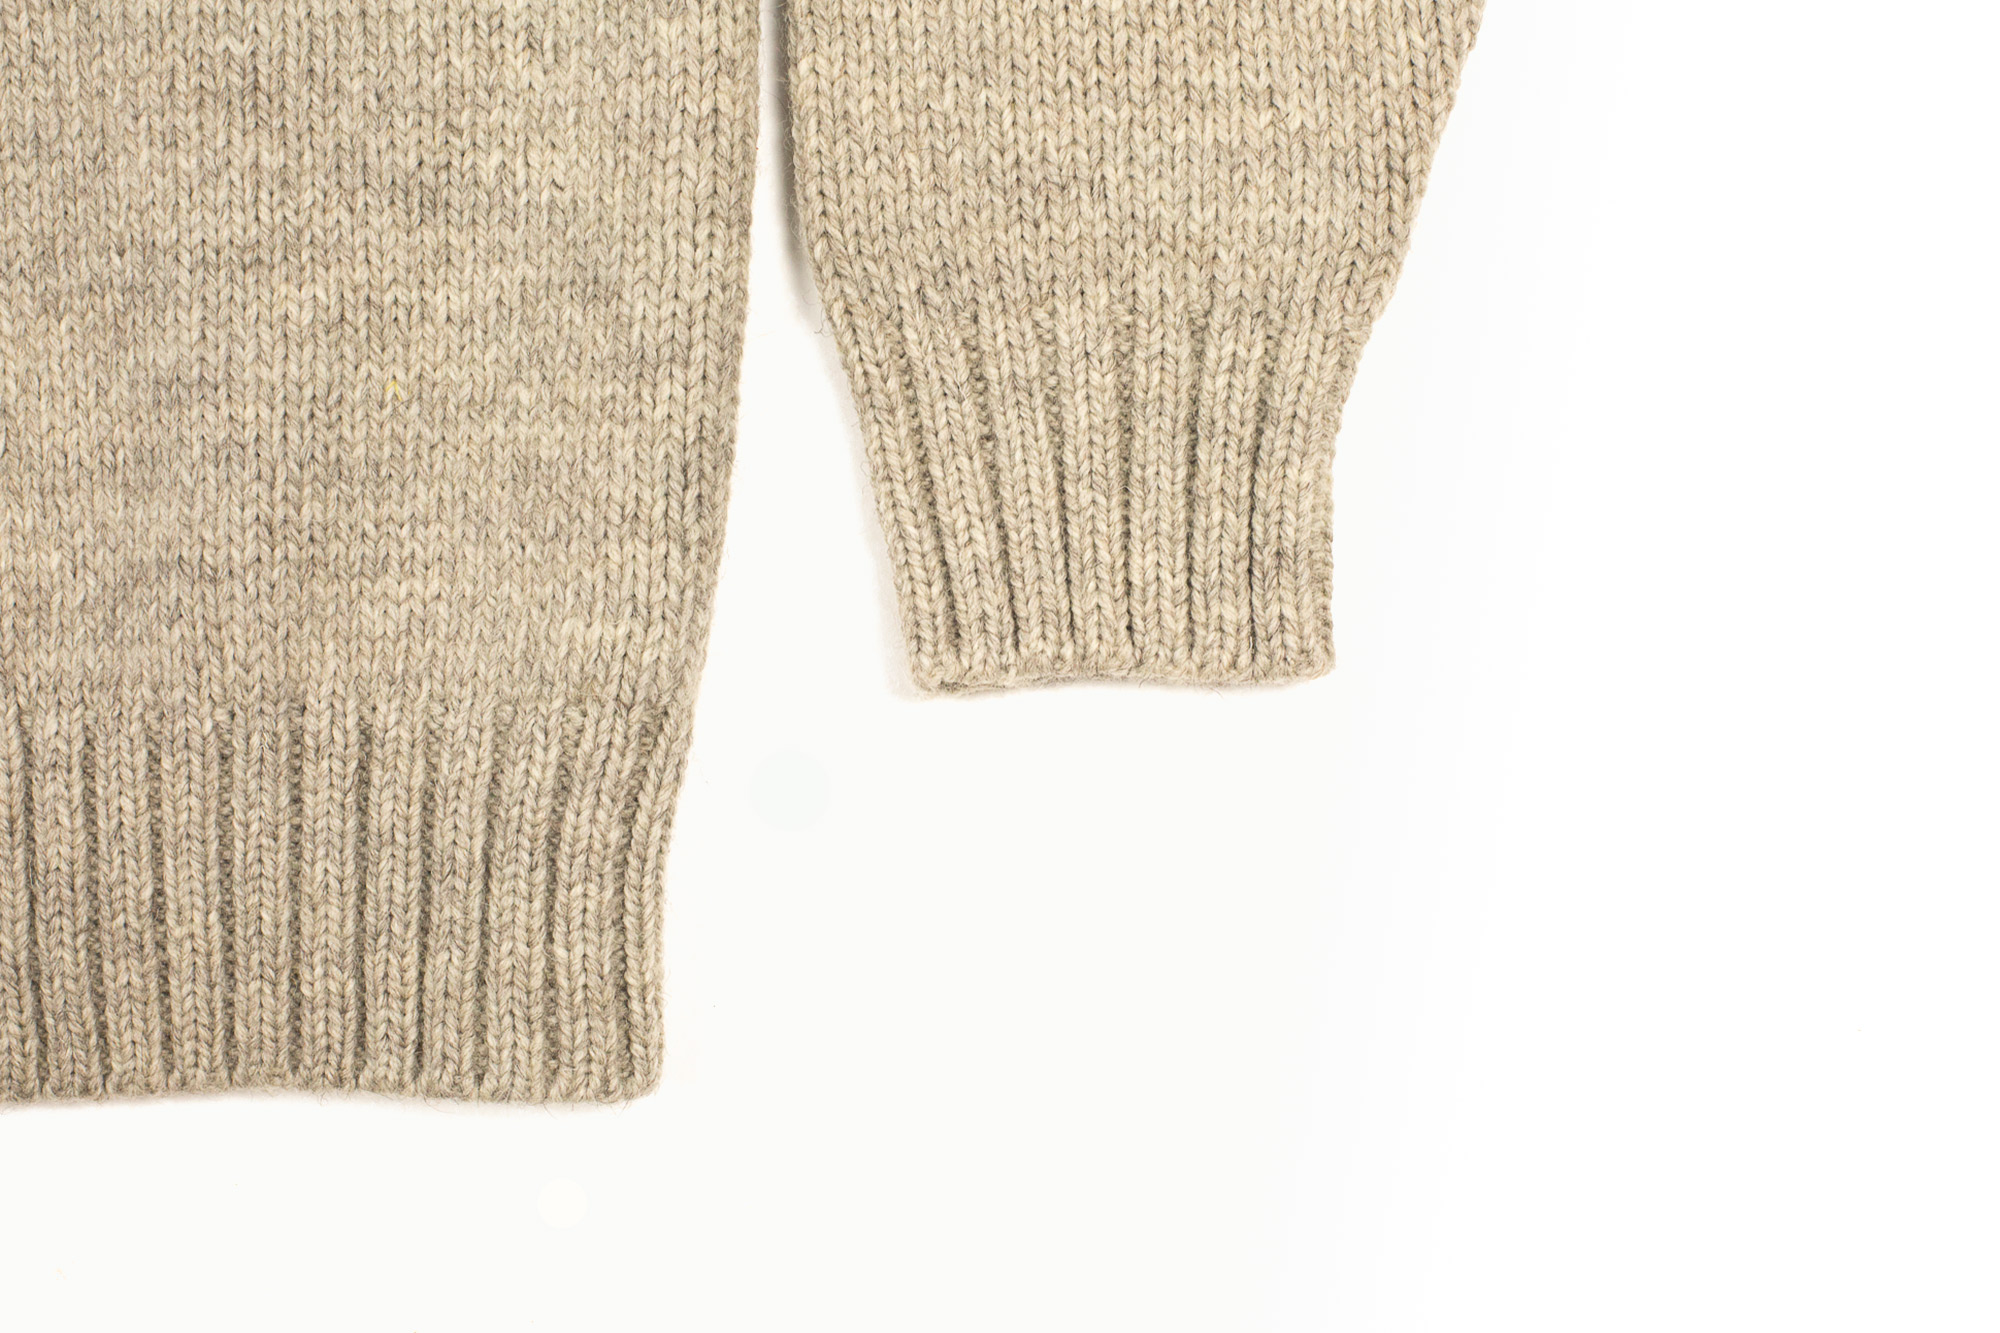 Corridor’s Highland Wool Collection Harnesses the Power of Peruvian Sheep